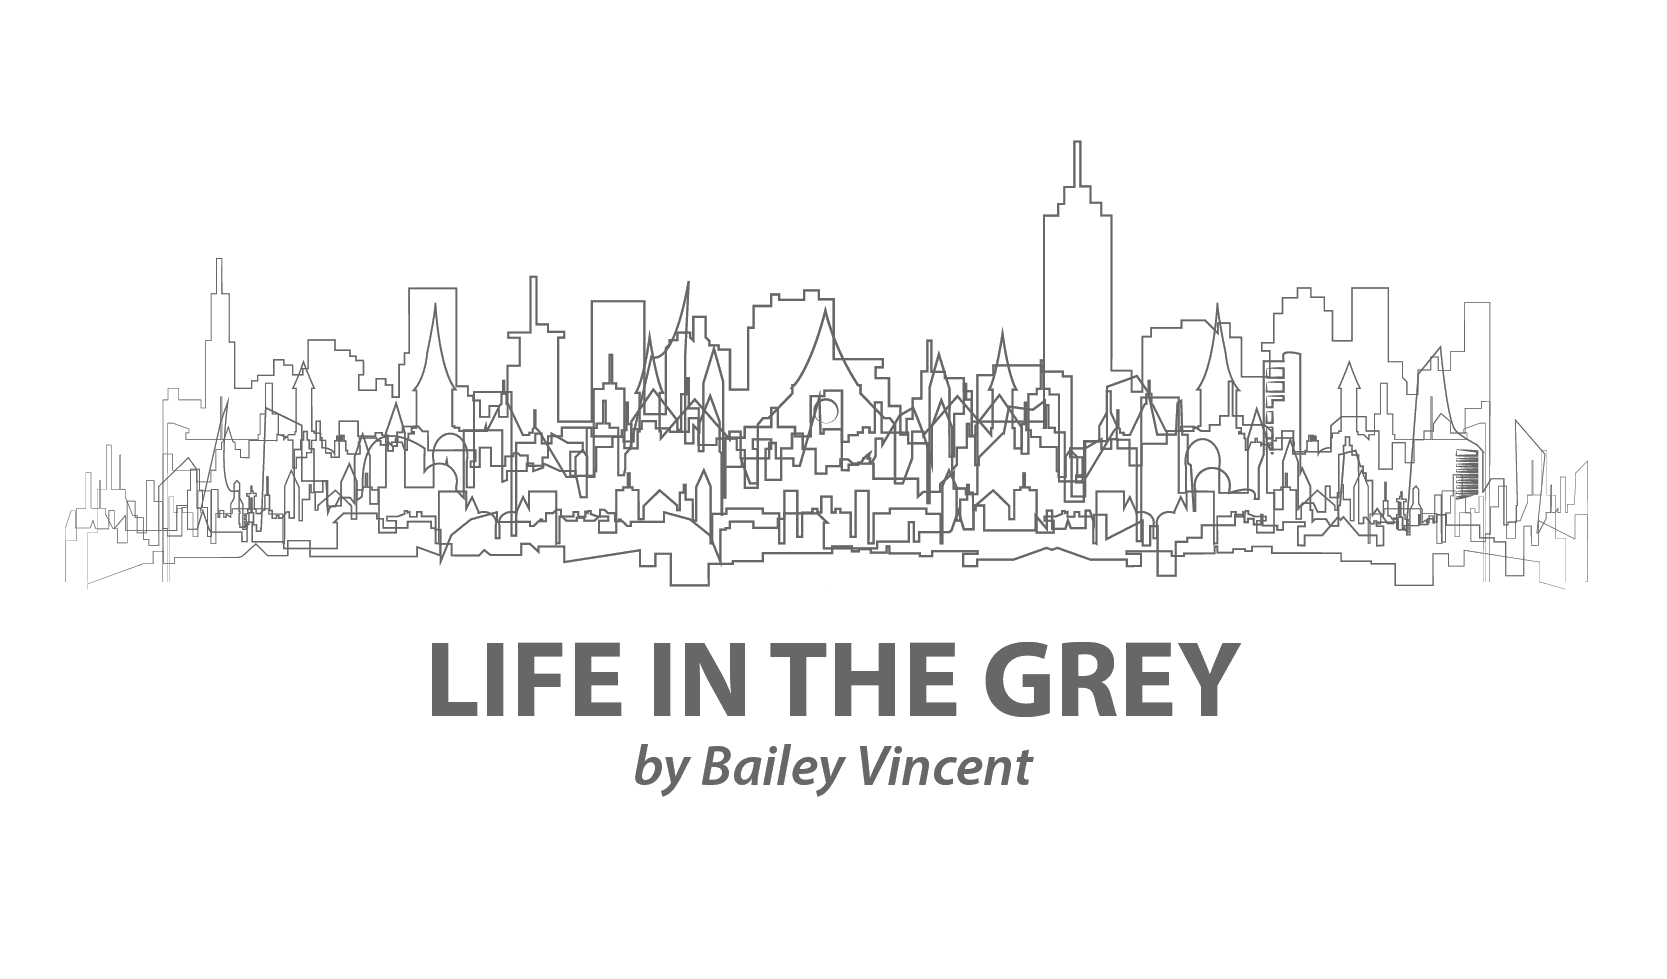 paranoia, life in the grey bailey vincent